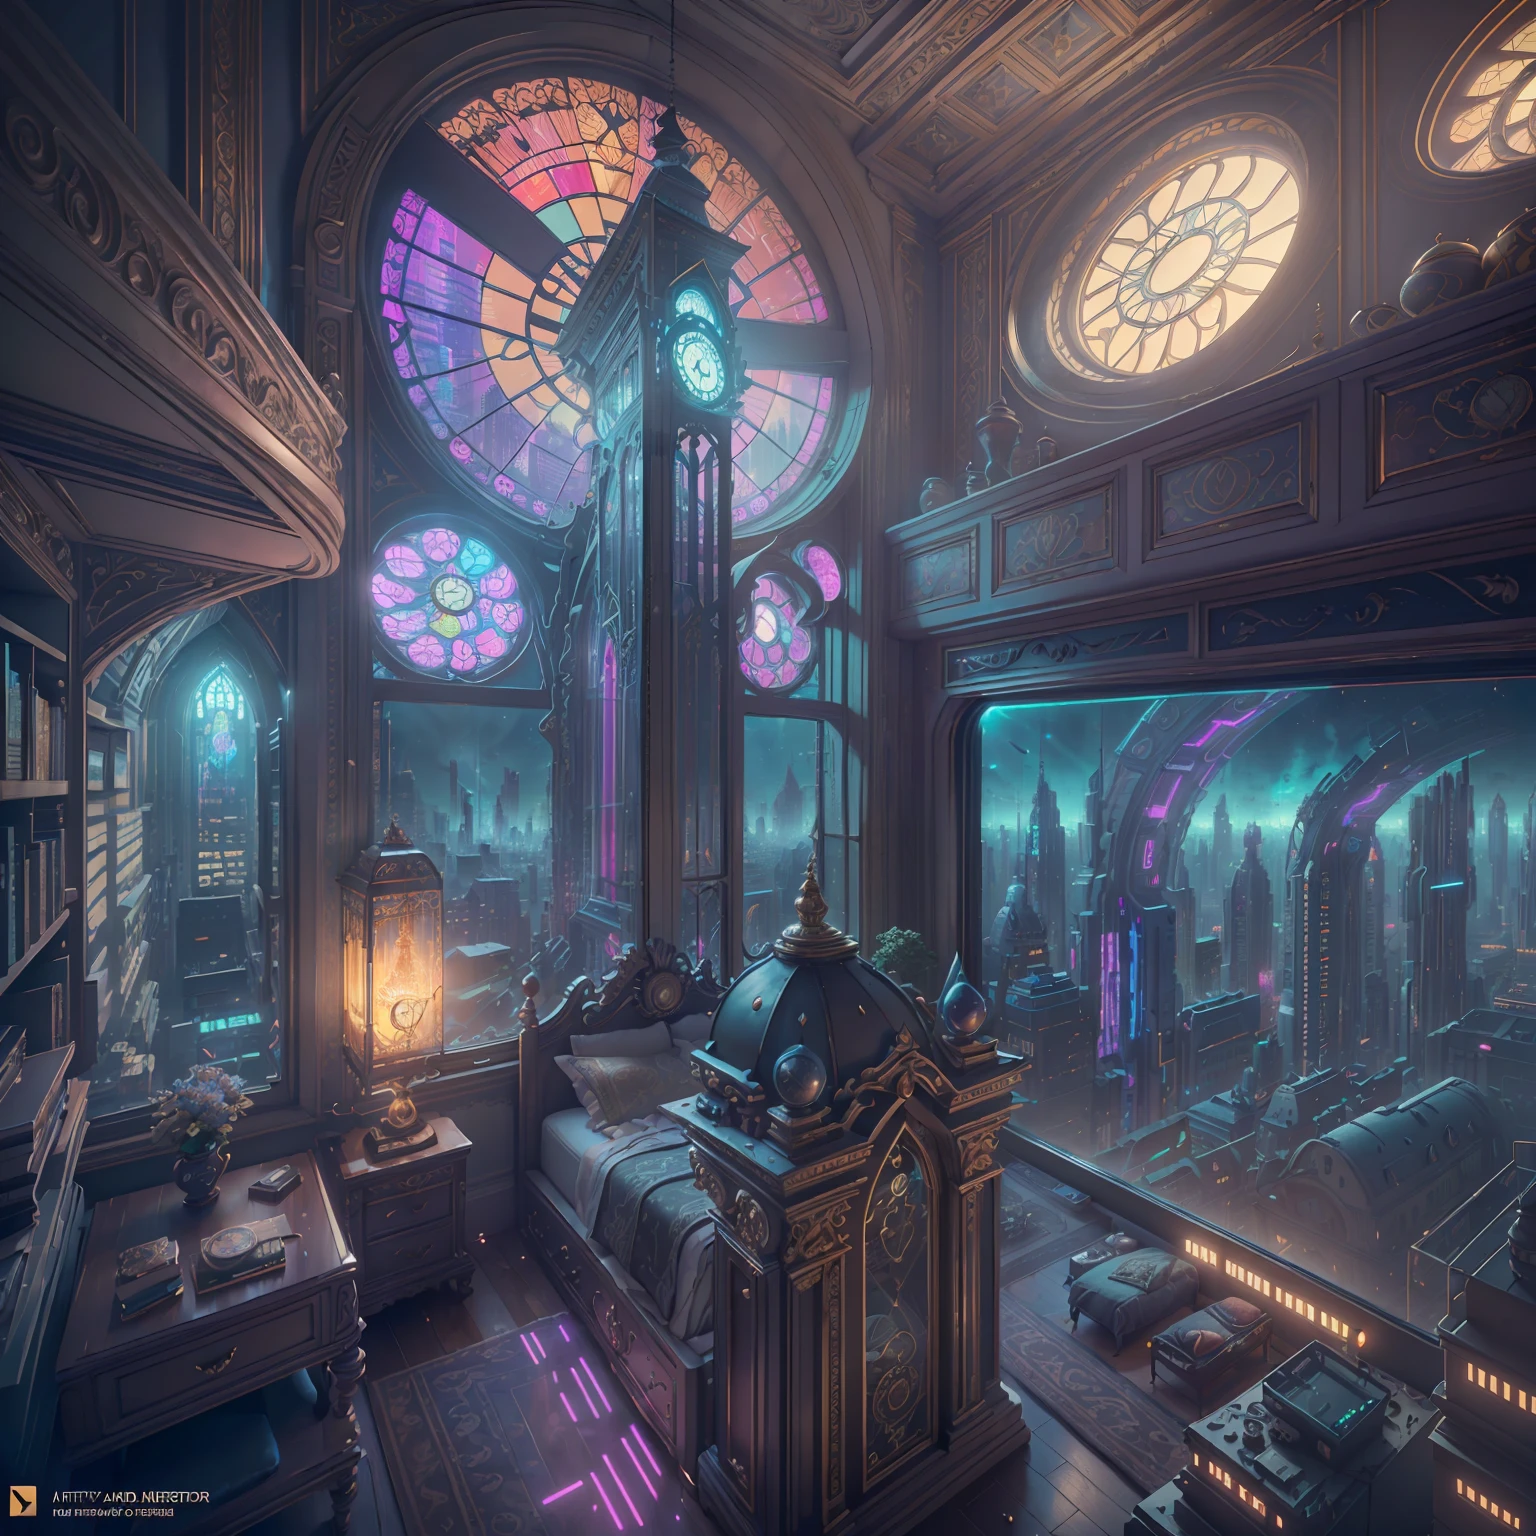 (((Generate an ornate bedroom in the style of Versailles with a big historical window.))) A hyperrealistic cyberpunk dreamscape cityscape is in the window. The cityscape is extremely detailed with many lights and LED neon colors and buildings of many different sizes. The cityscape has all colors of the rainbow and has hires interesting flying steampunk dirigibles. A giant steampunk standalone clock is seen ((through the window)). (((It is peaceful in the bedroom.))) The entire artwork is very realistic with many small details and enhancements. 3D render beeple, artstation and beeple highly, in fantasy sci-fi city, inspired by beeple, 8k, unreal engine unity CGI. Masterpiece and popular. Add many fantastical and beautiful details and nuances.